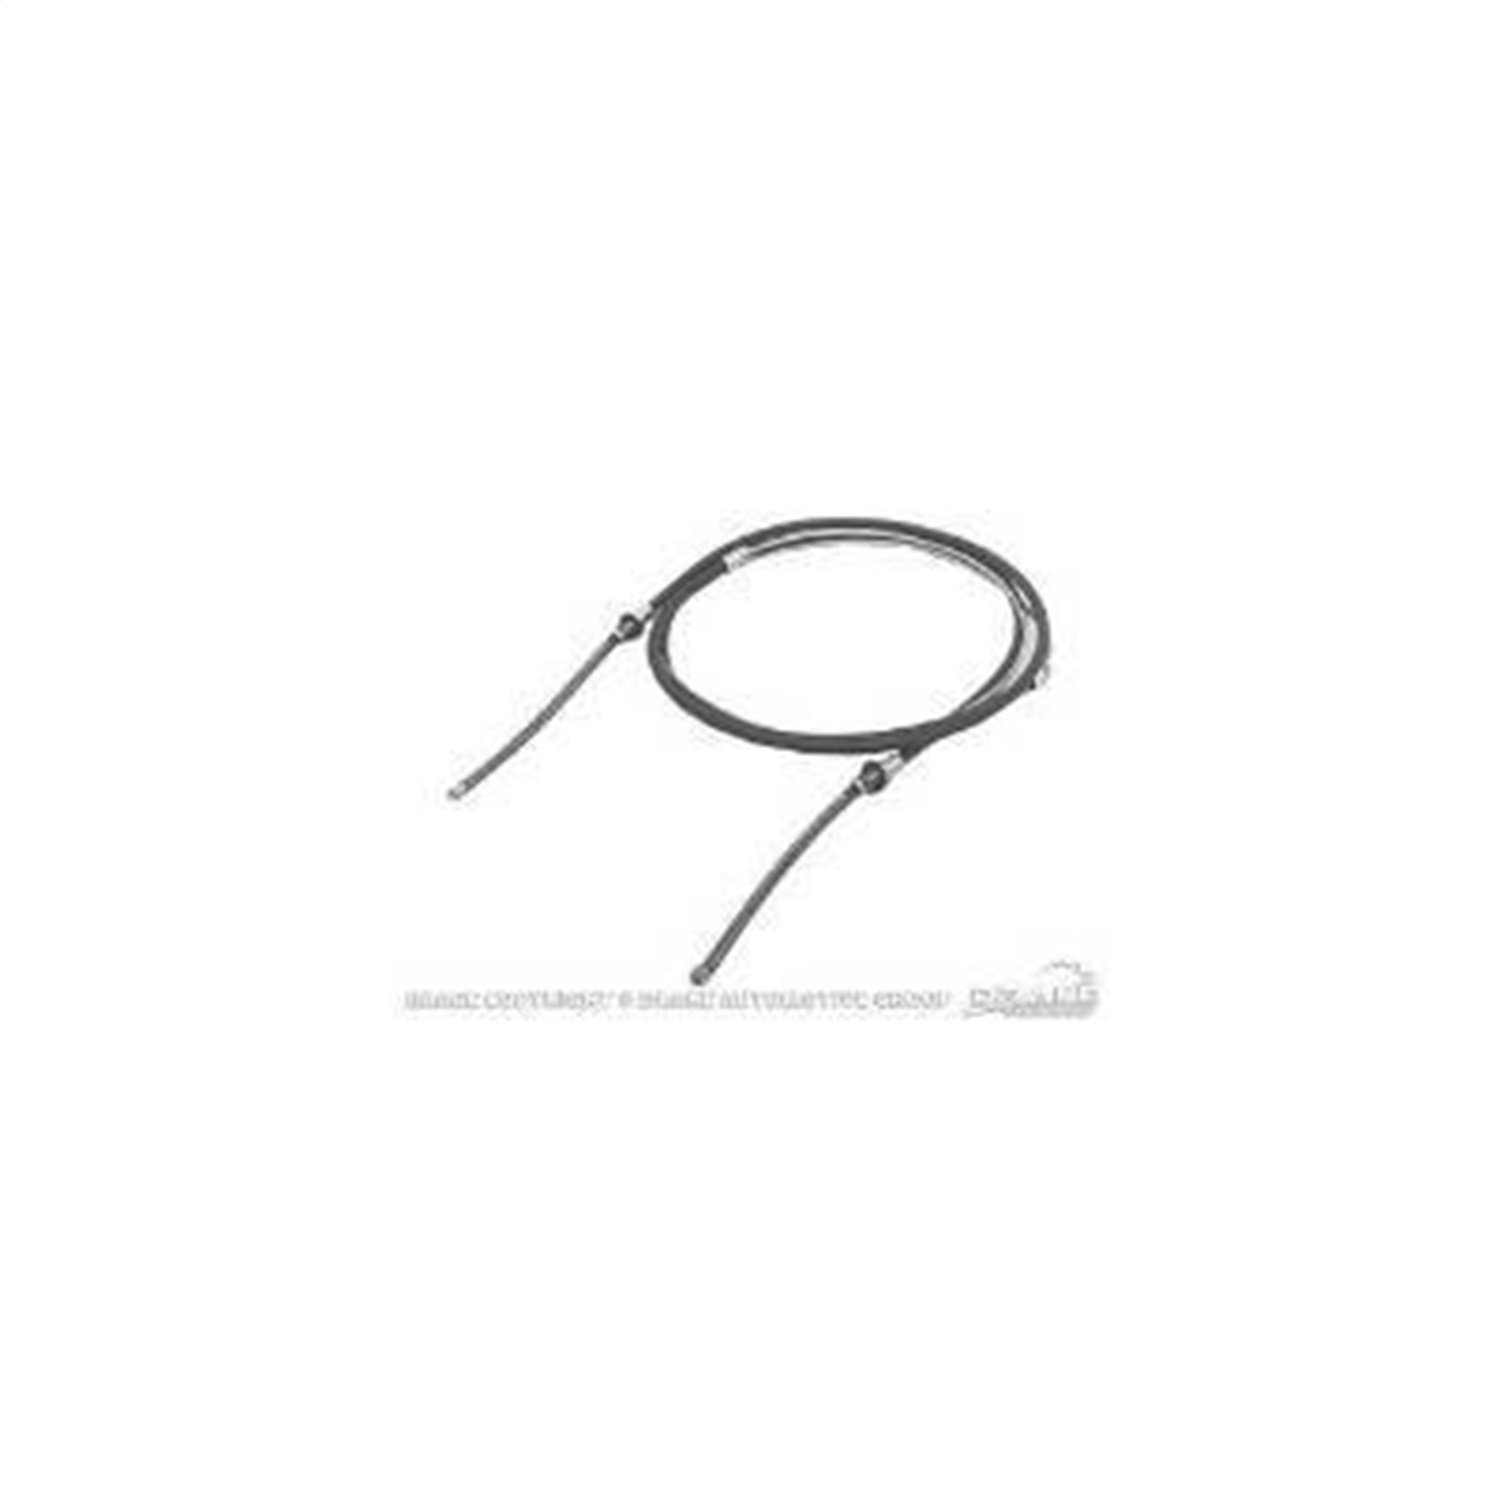 Parking Brake Cable 1970-1973 Ford Mustang